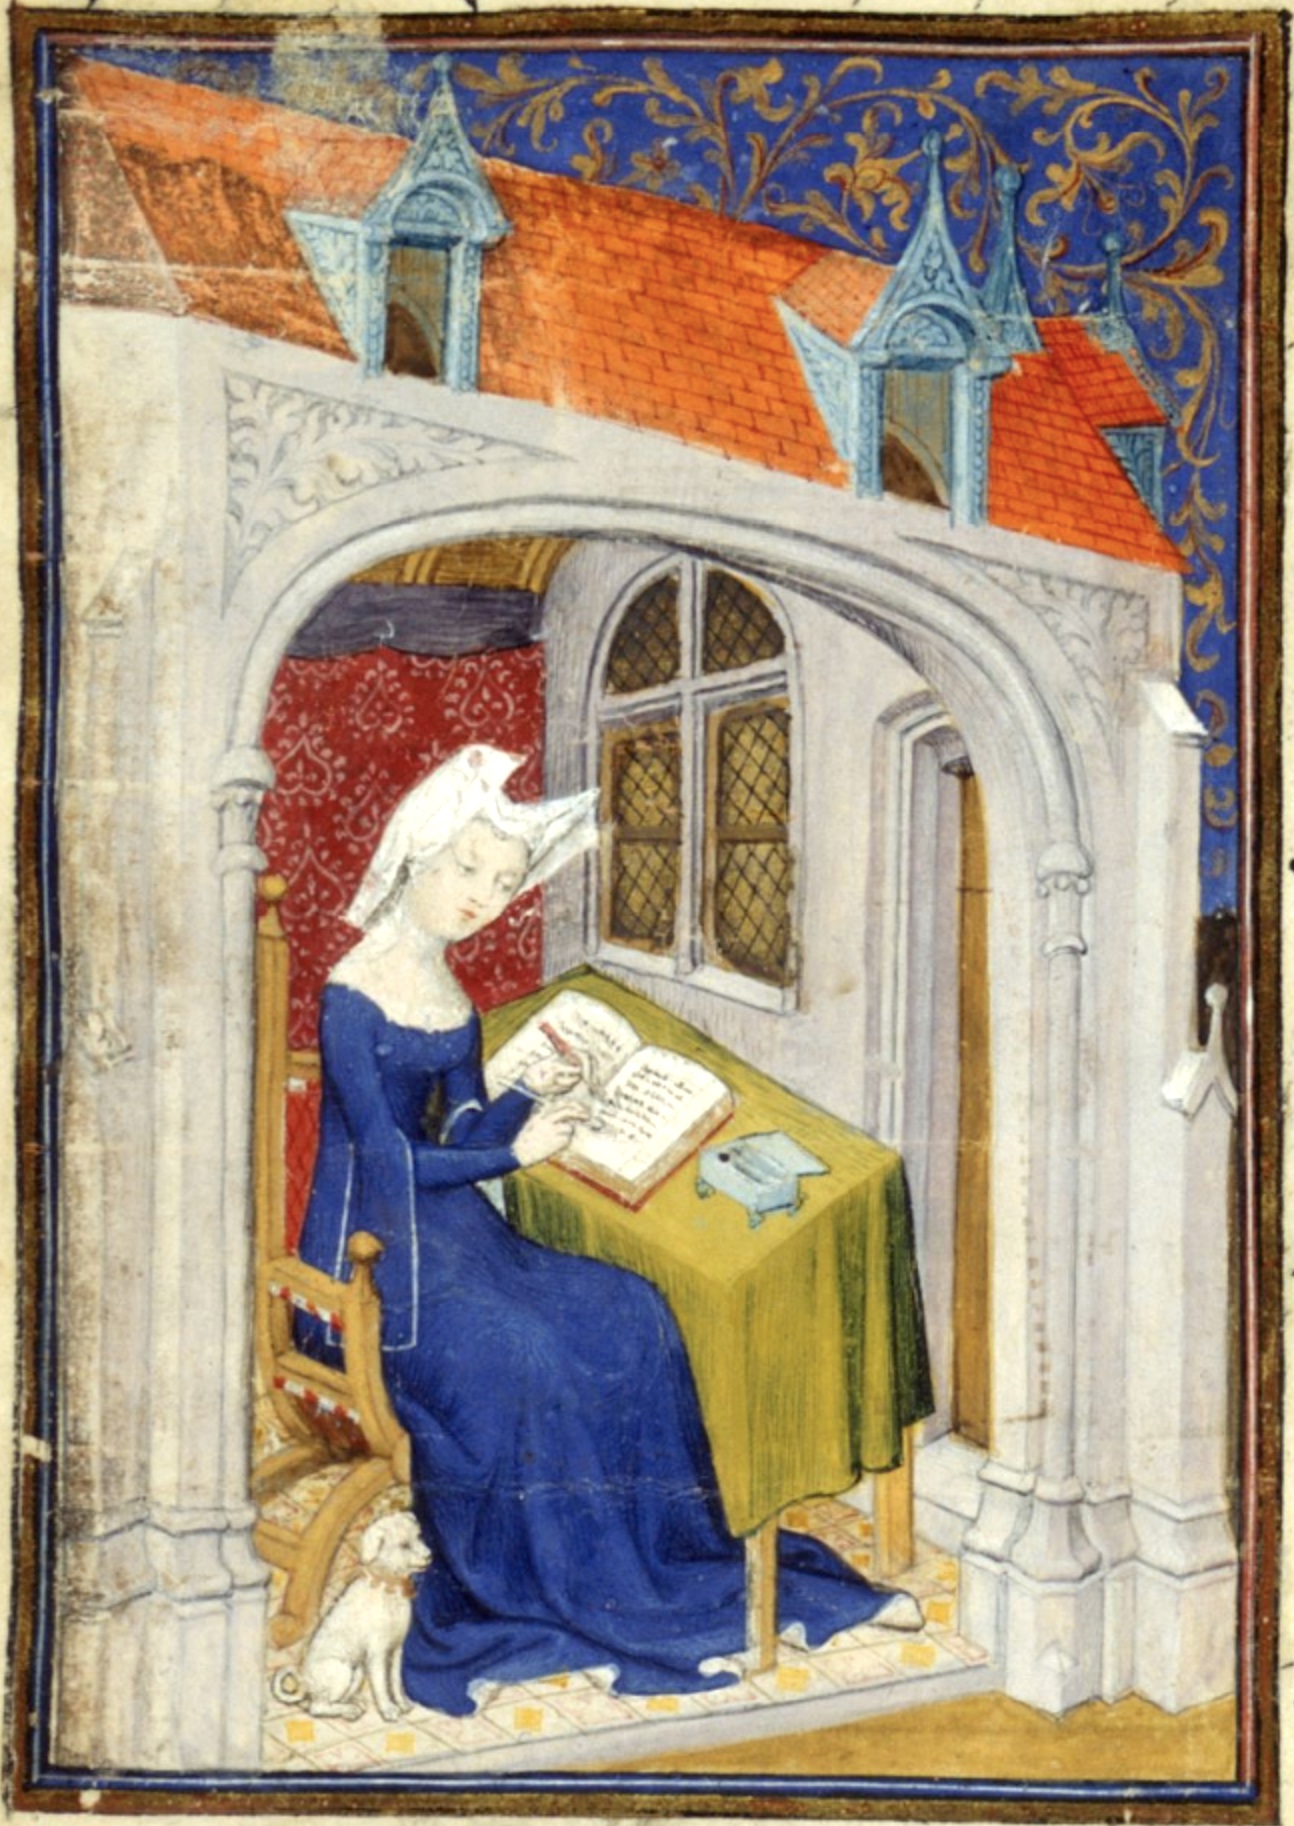 Christine de Pizan in her study (detail), for The Queen's Manuscript, c. 1410–1414, f. 4r (Harley MS 4431, British Library)